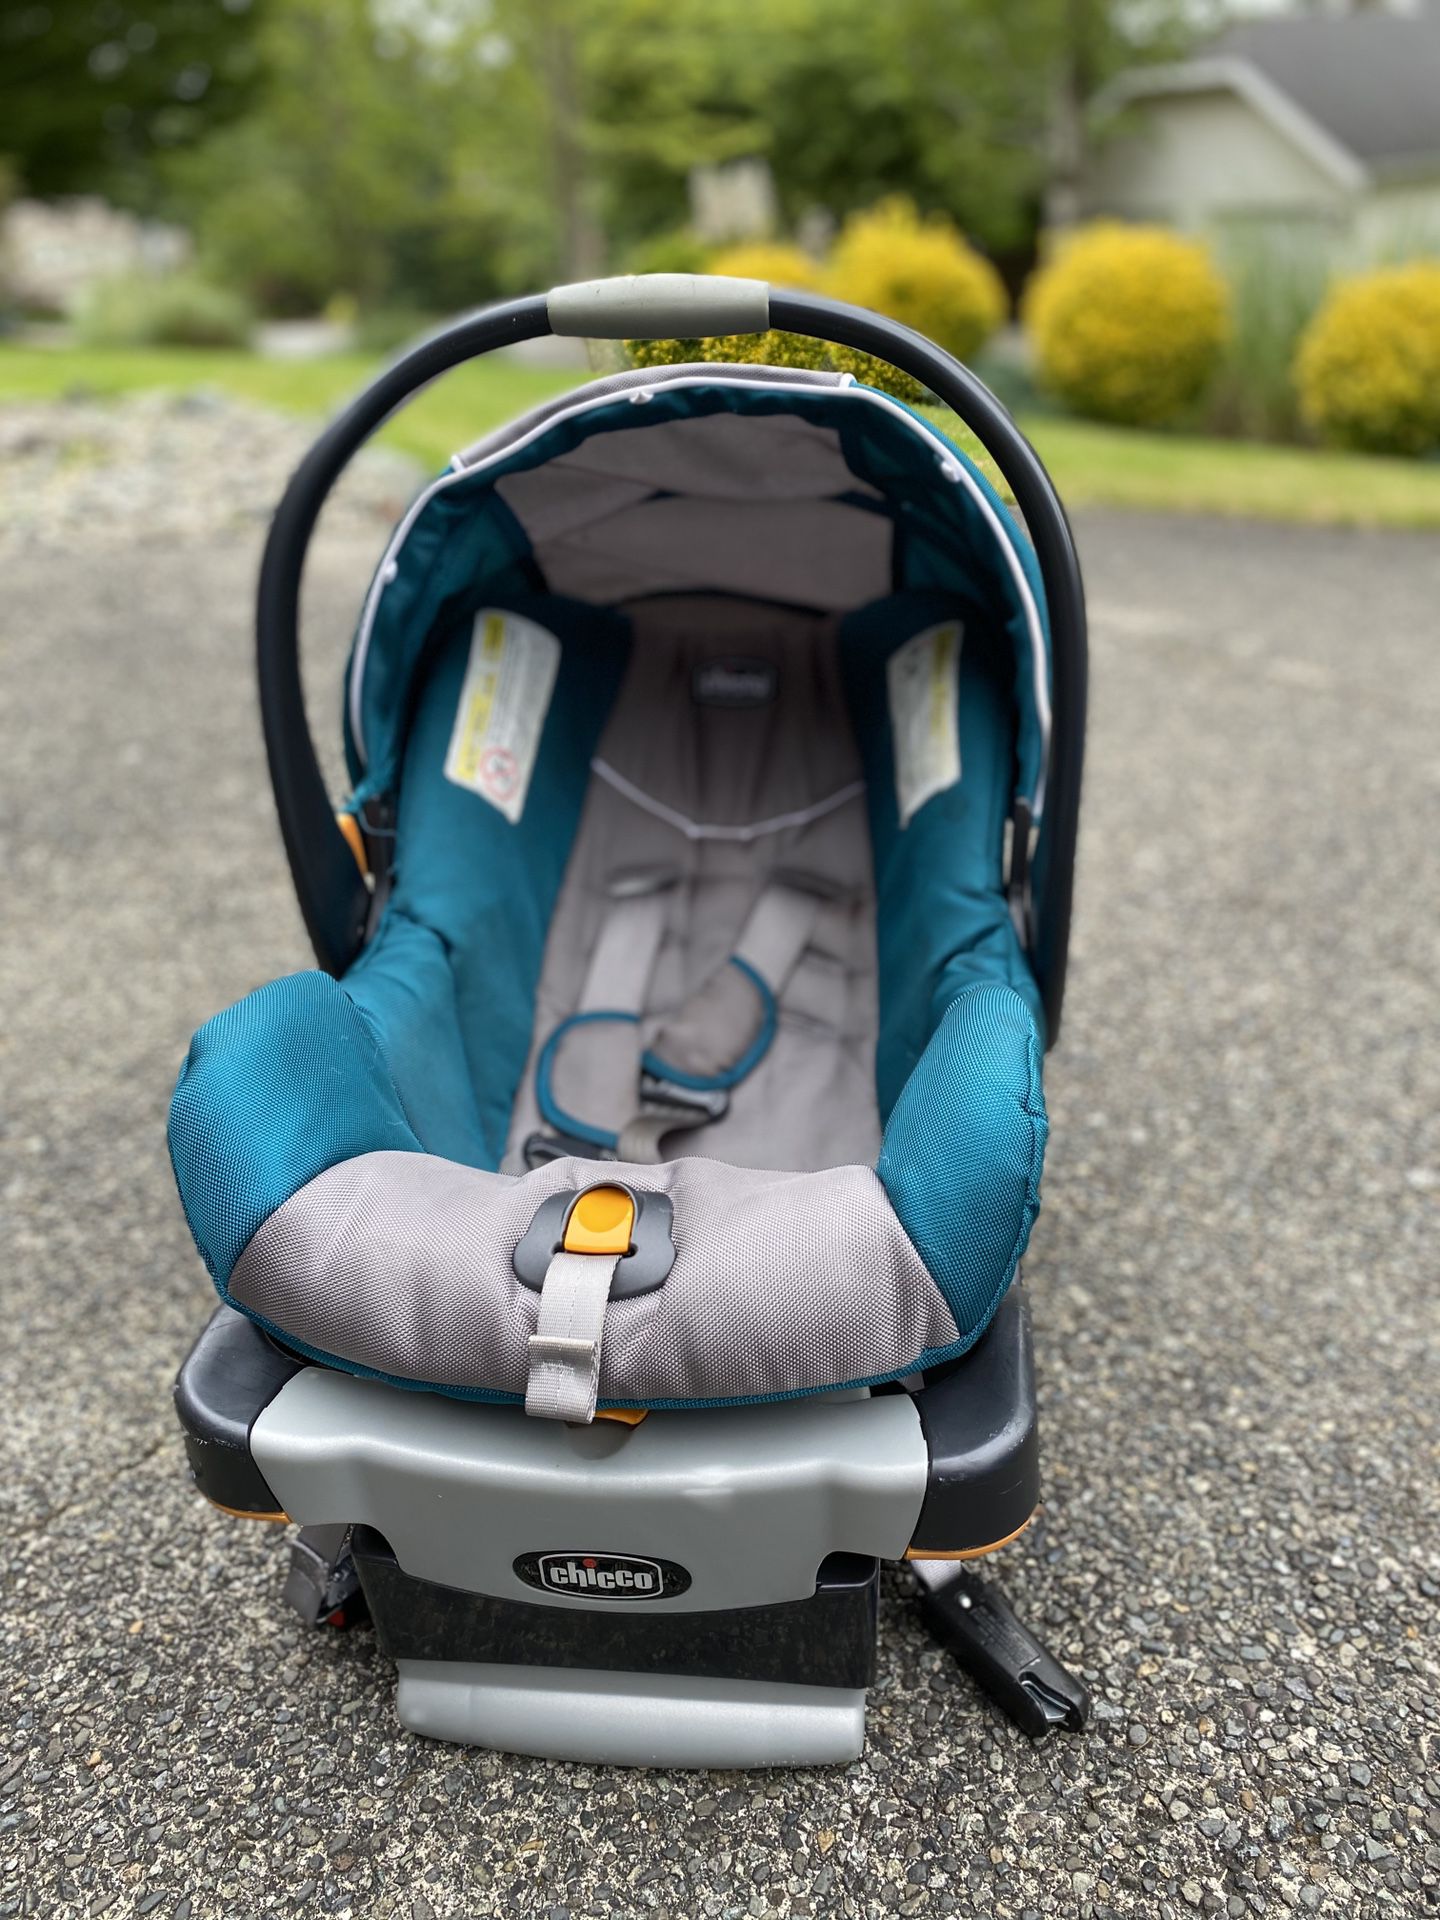 Chicco infant car seat